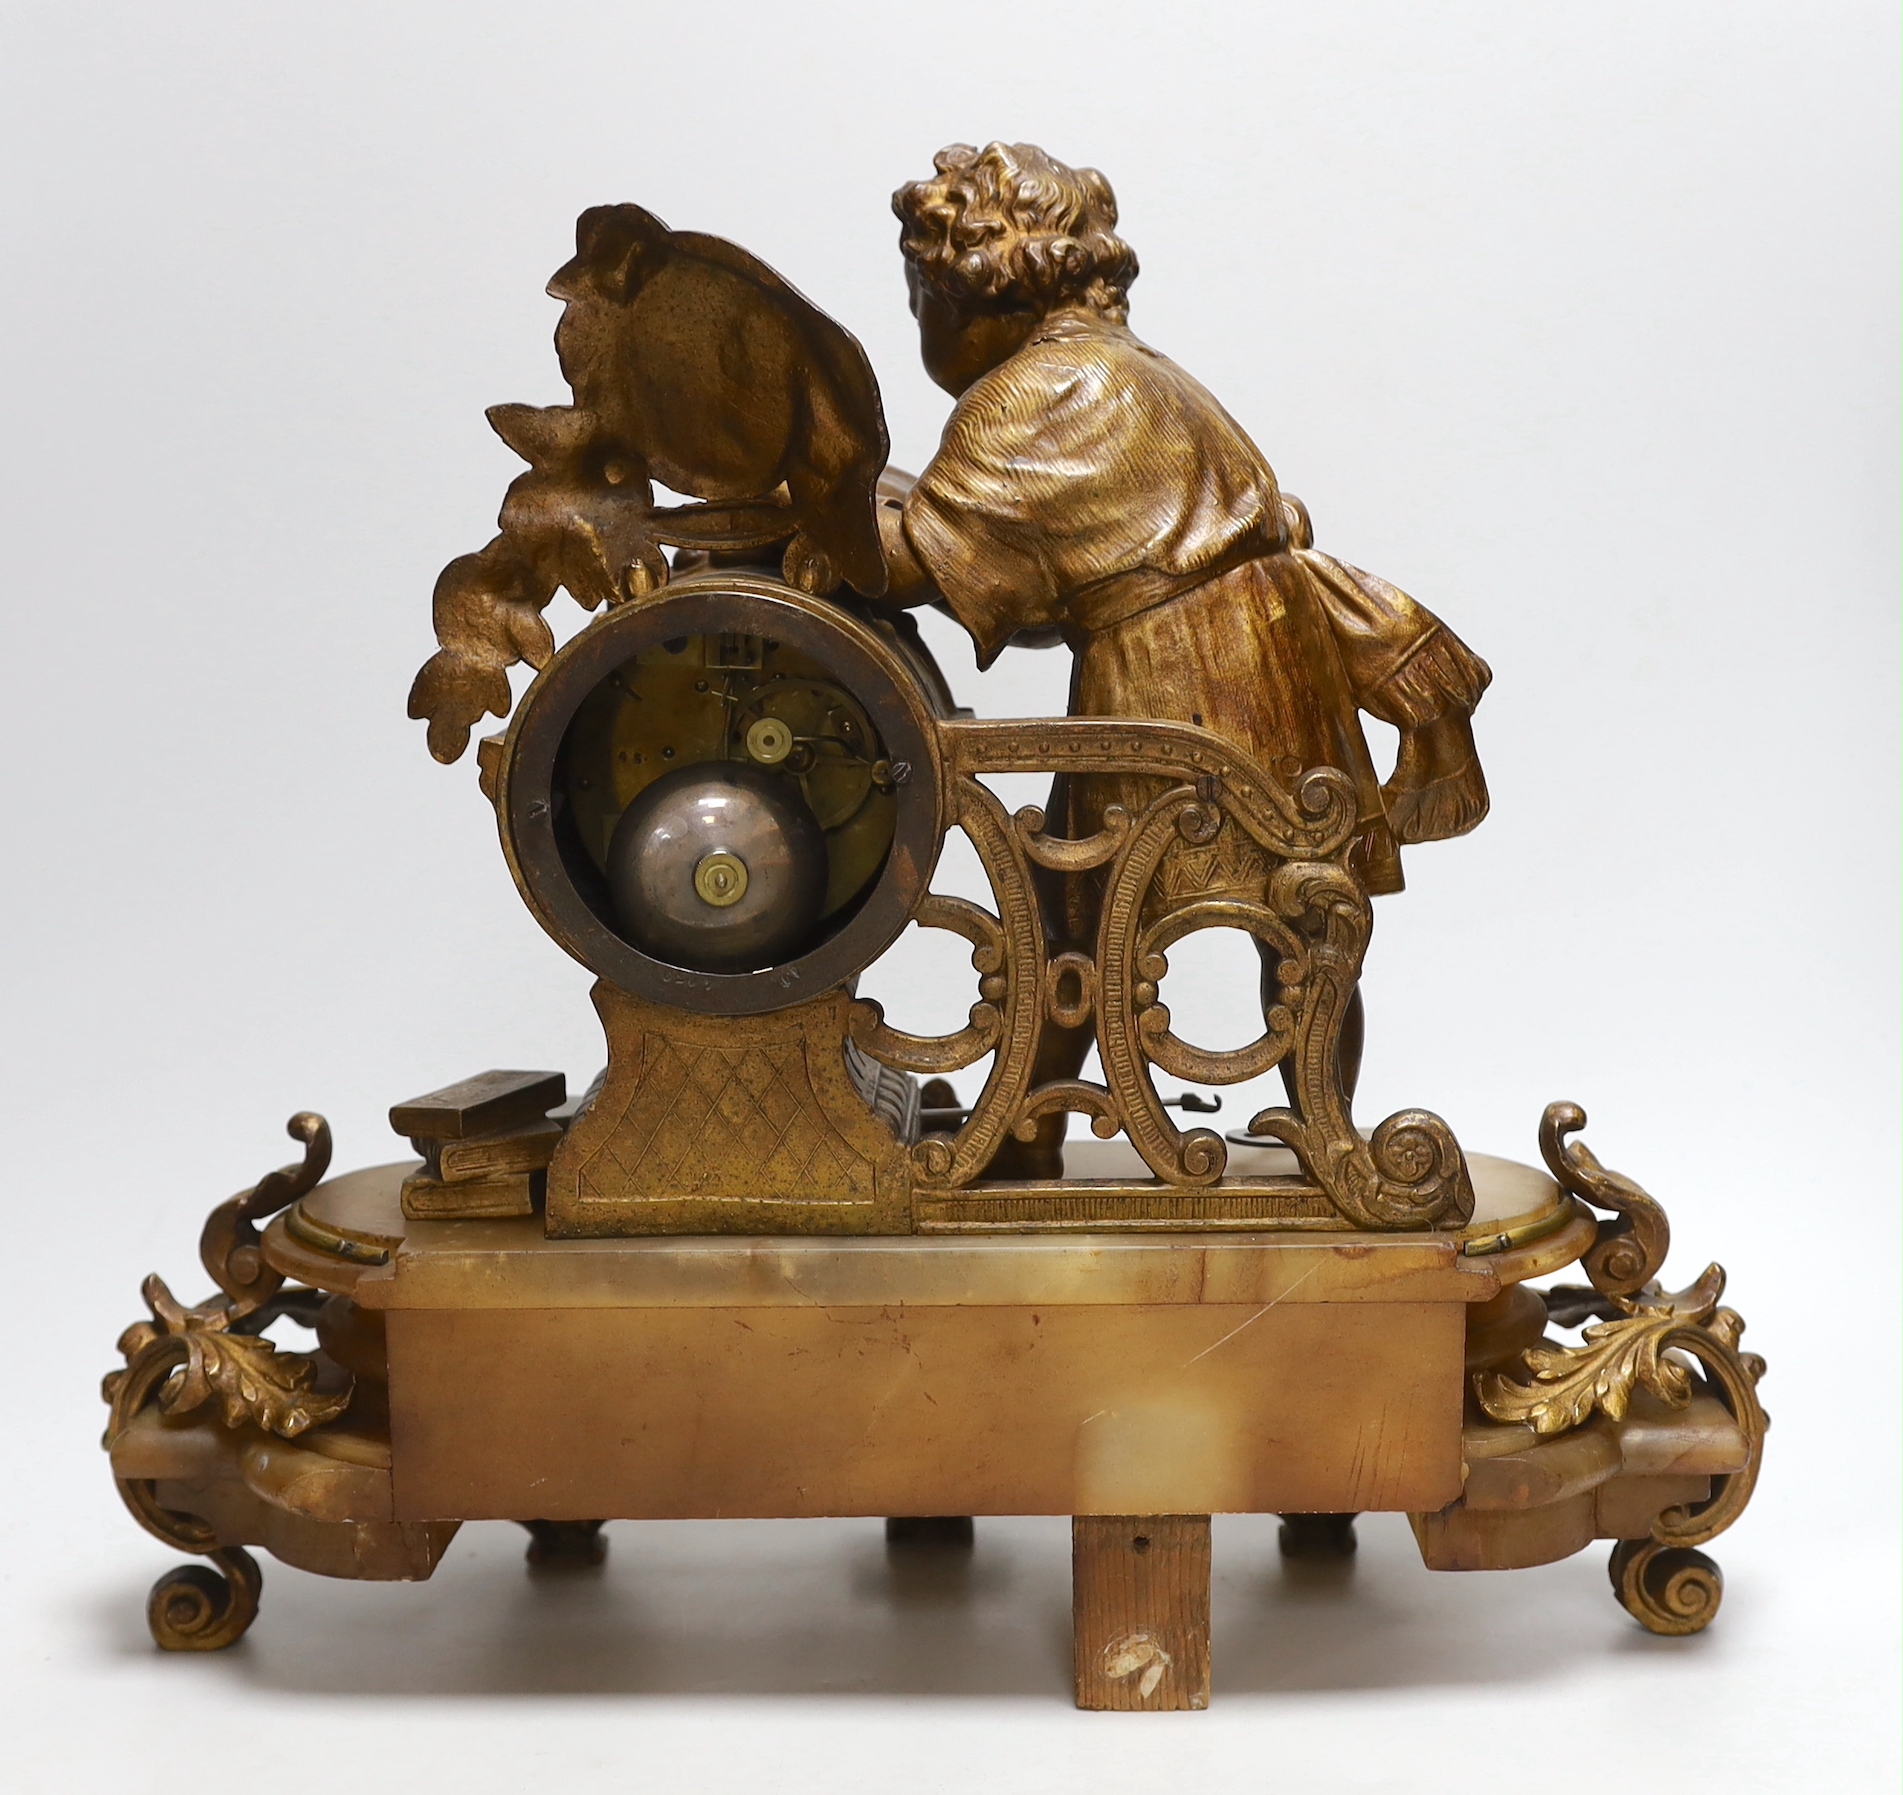 A French bronze and onyx mantel clock by Japy Frere with figure of a child reading, striking on a - Image 3 of 3